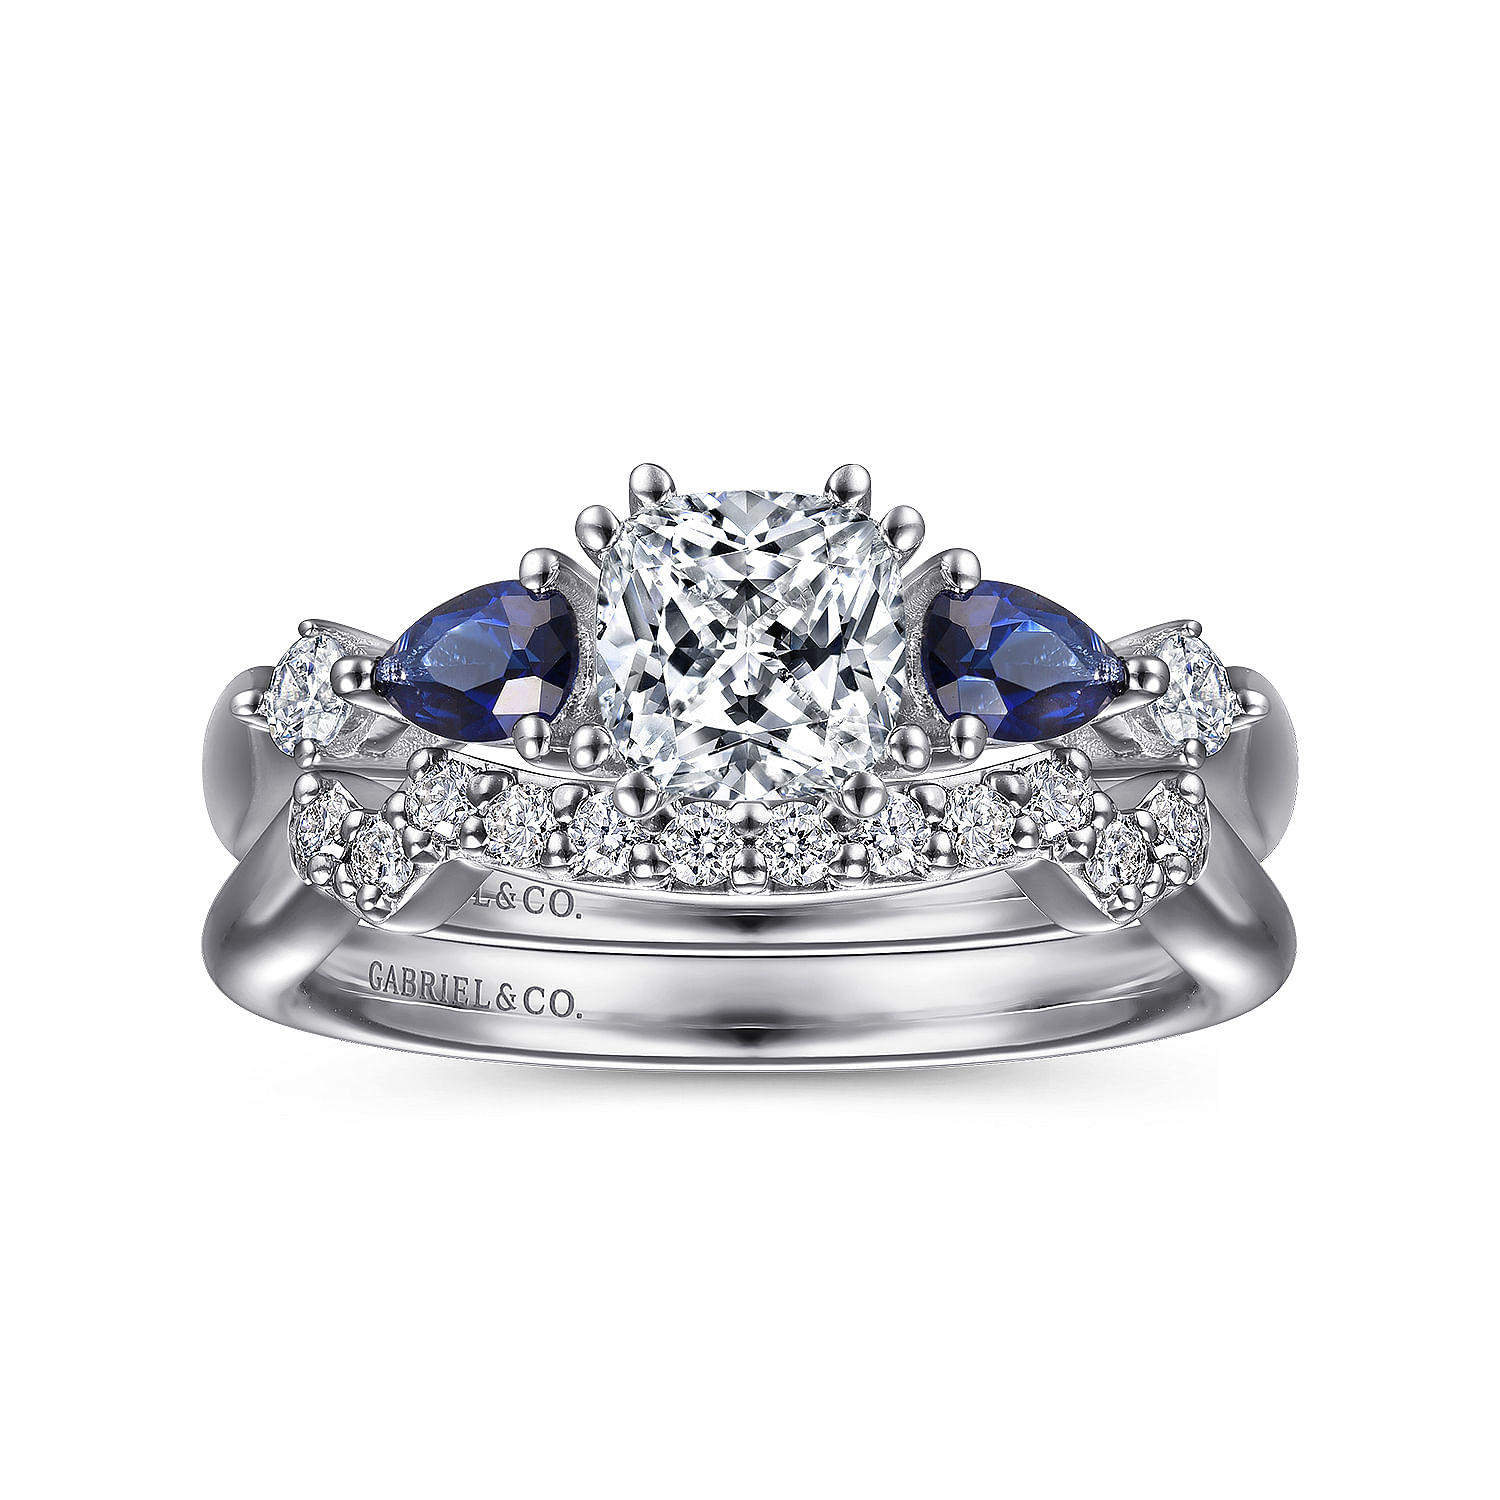 14K White Gold Cushion Cut Five Stone Sapphire and Diamond Engagement Ring